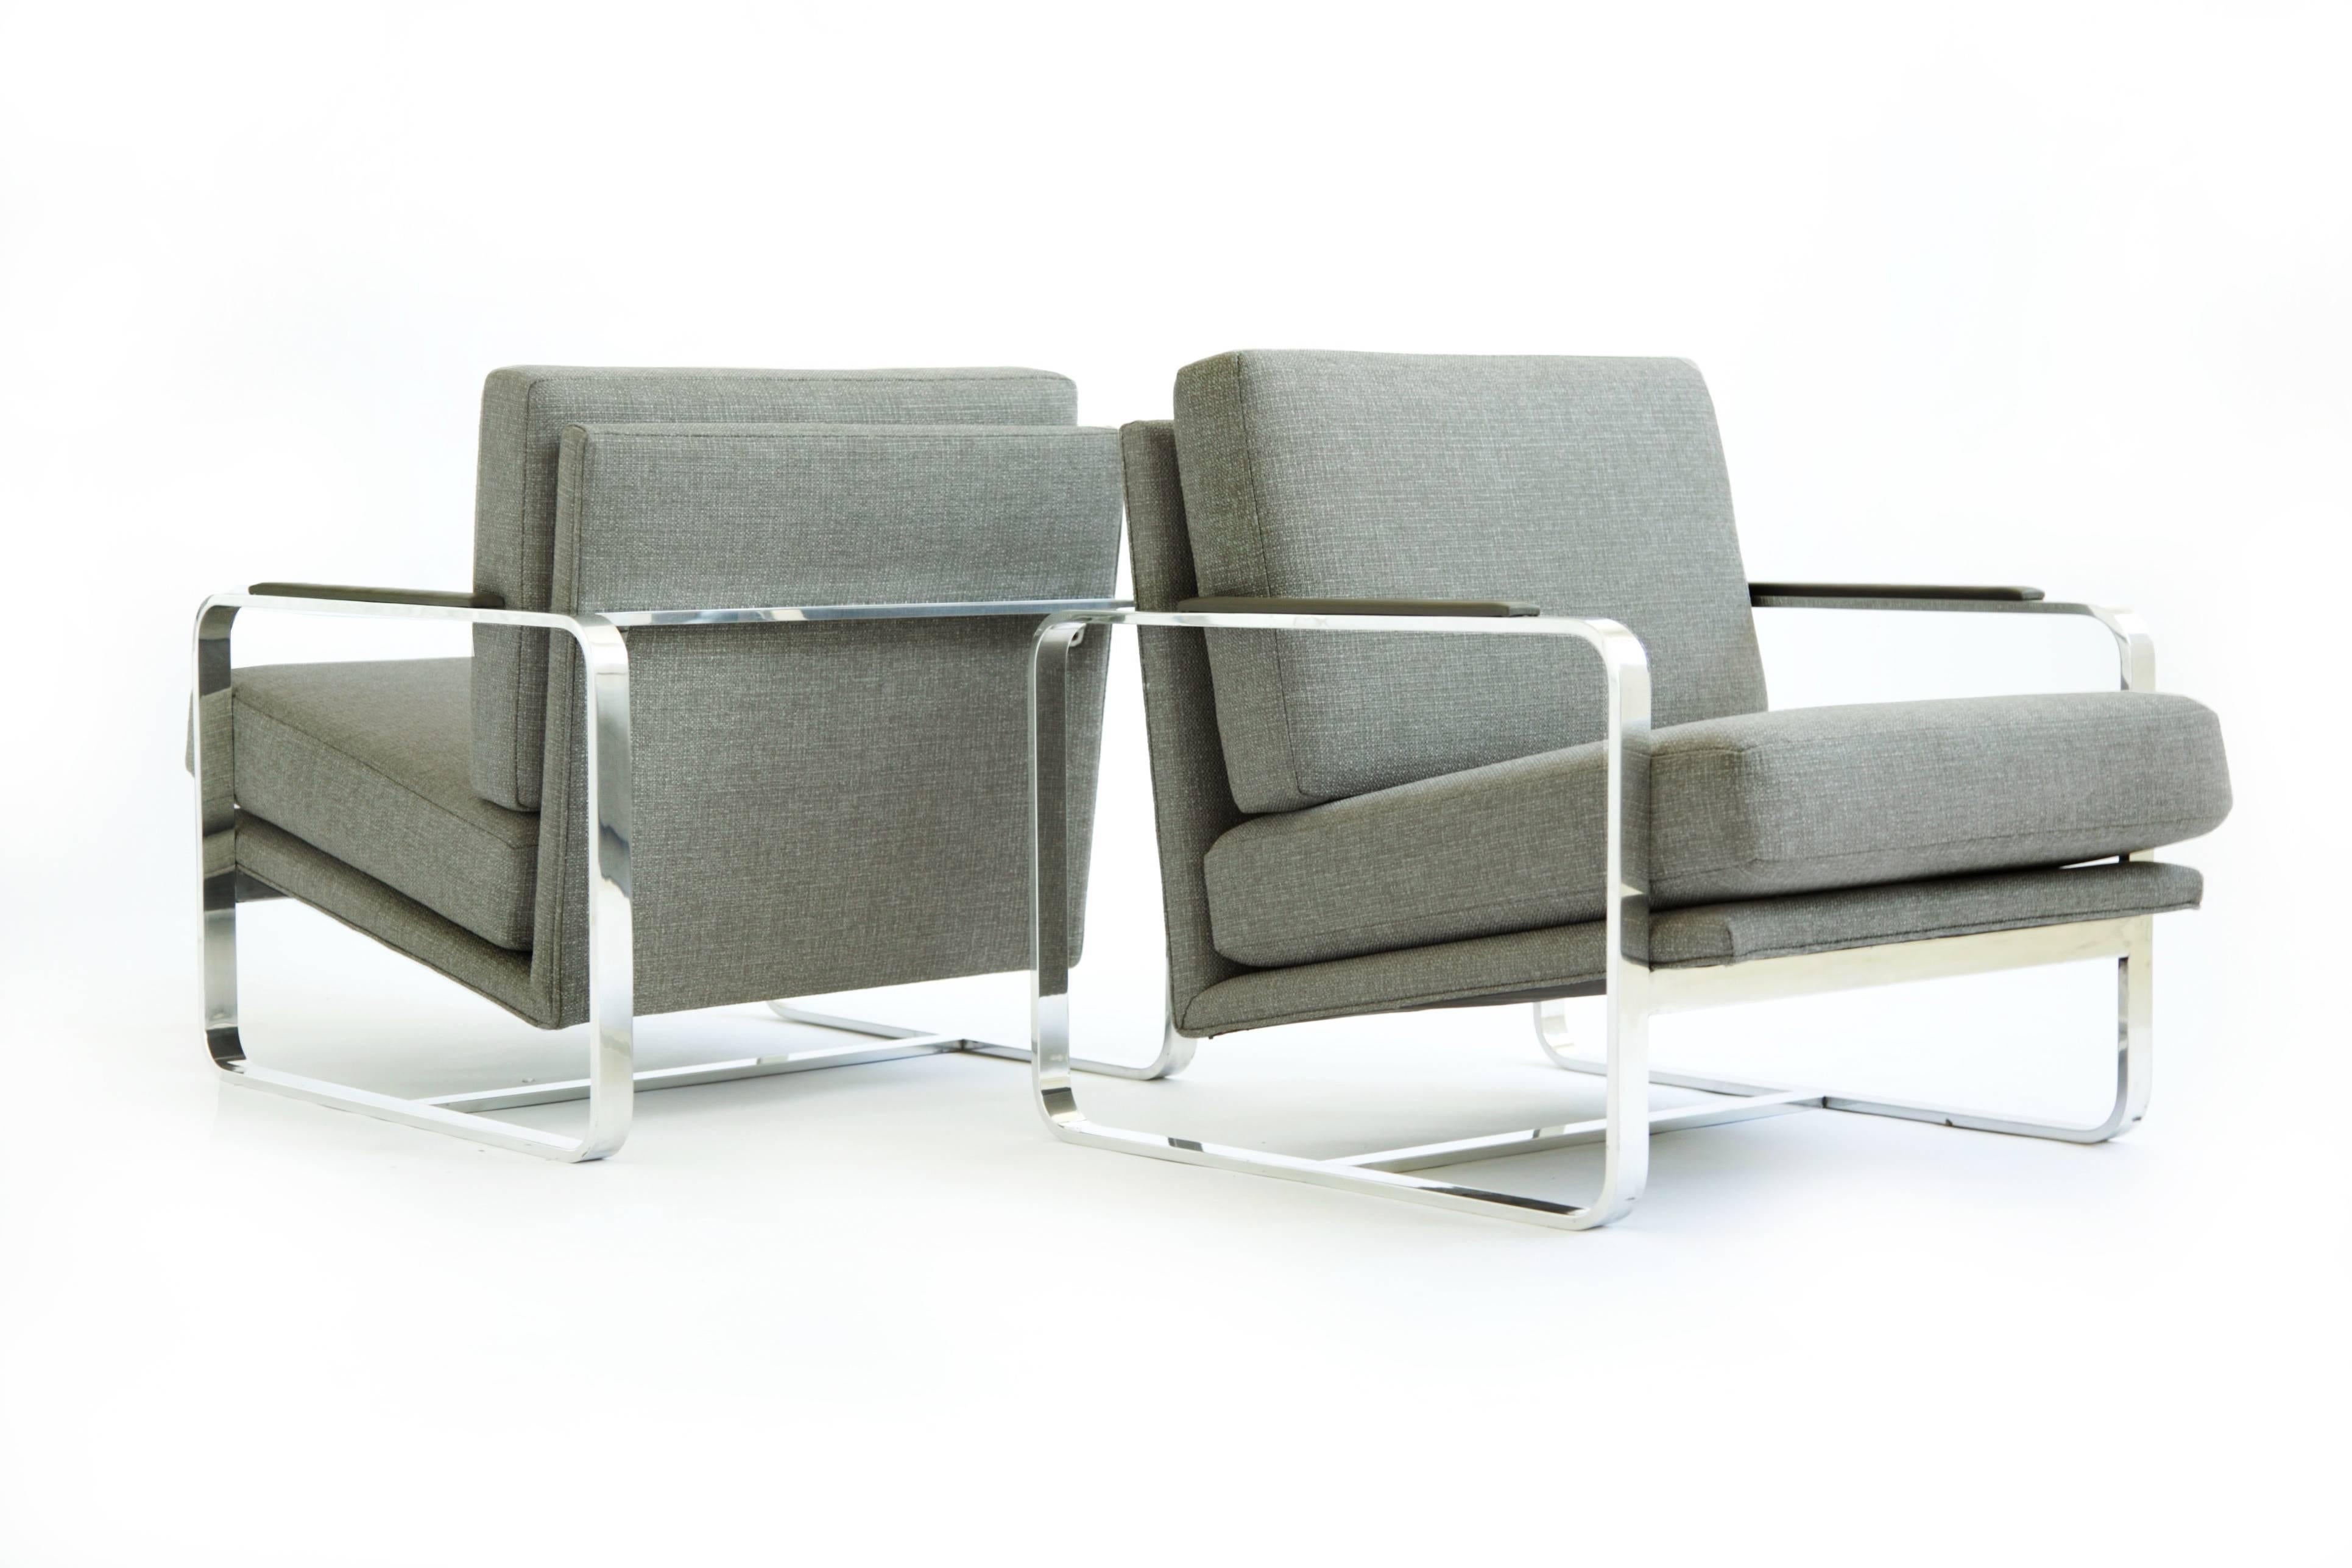 Milo Baughman style pair of lounges, stainless steel frames with new upholstery recovered in great plains cotton blend fabric, leather arm pads. 
Seat H: 16.5